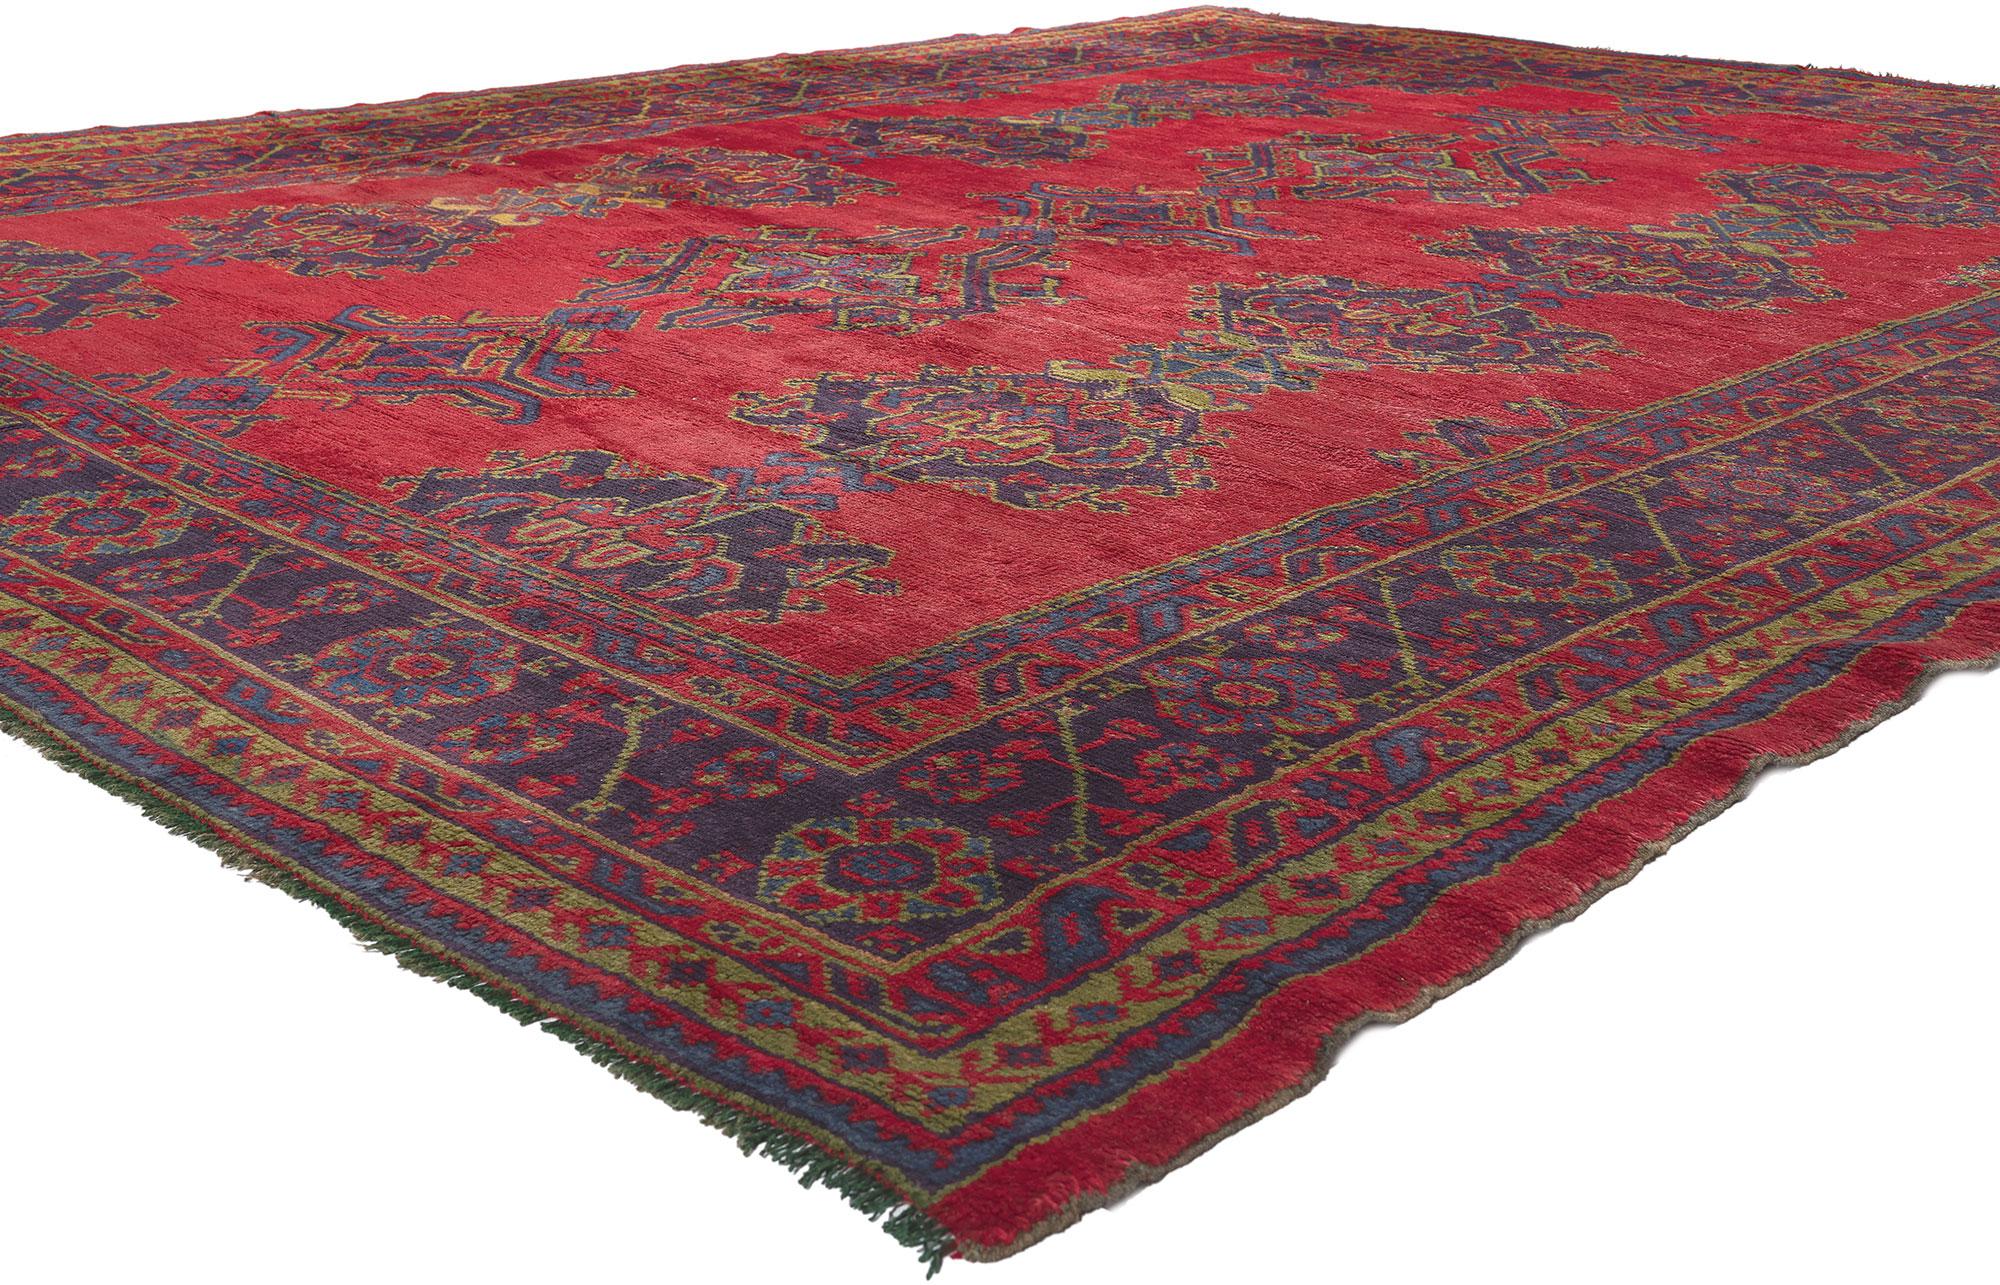 78524 Antique Turkish Oushak Rug, 09'02 x 11'02.
Showcasing a bold expressive design with incredible detail and texture, this hand knotted wool antique red Oushak rug is a captivating vision of woven beauty. The allover pattern and lively colorway